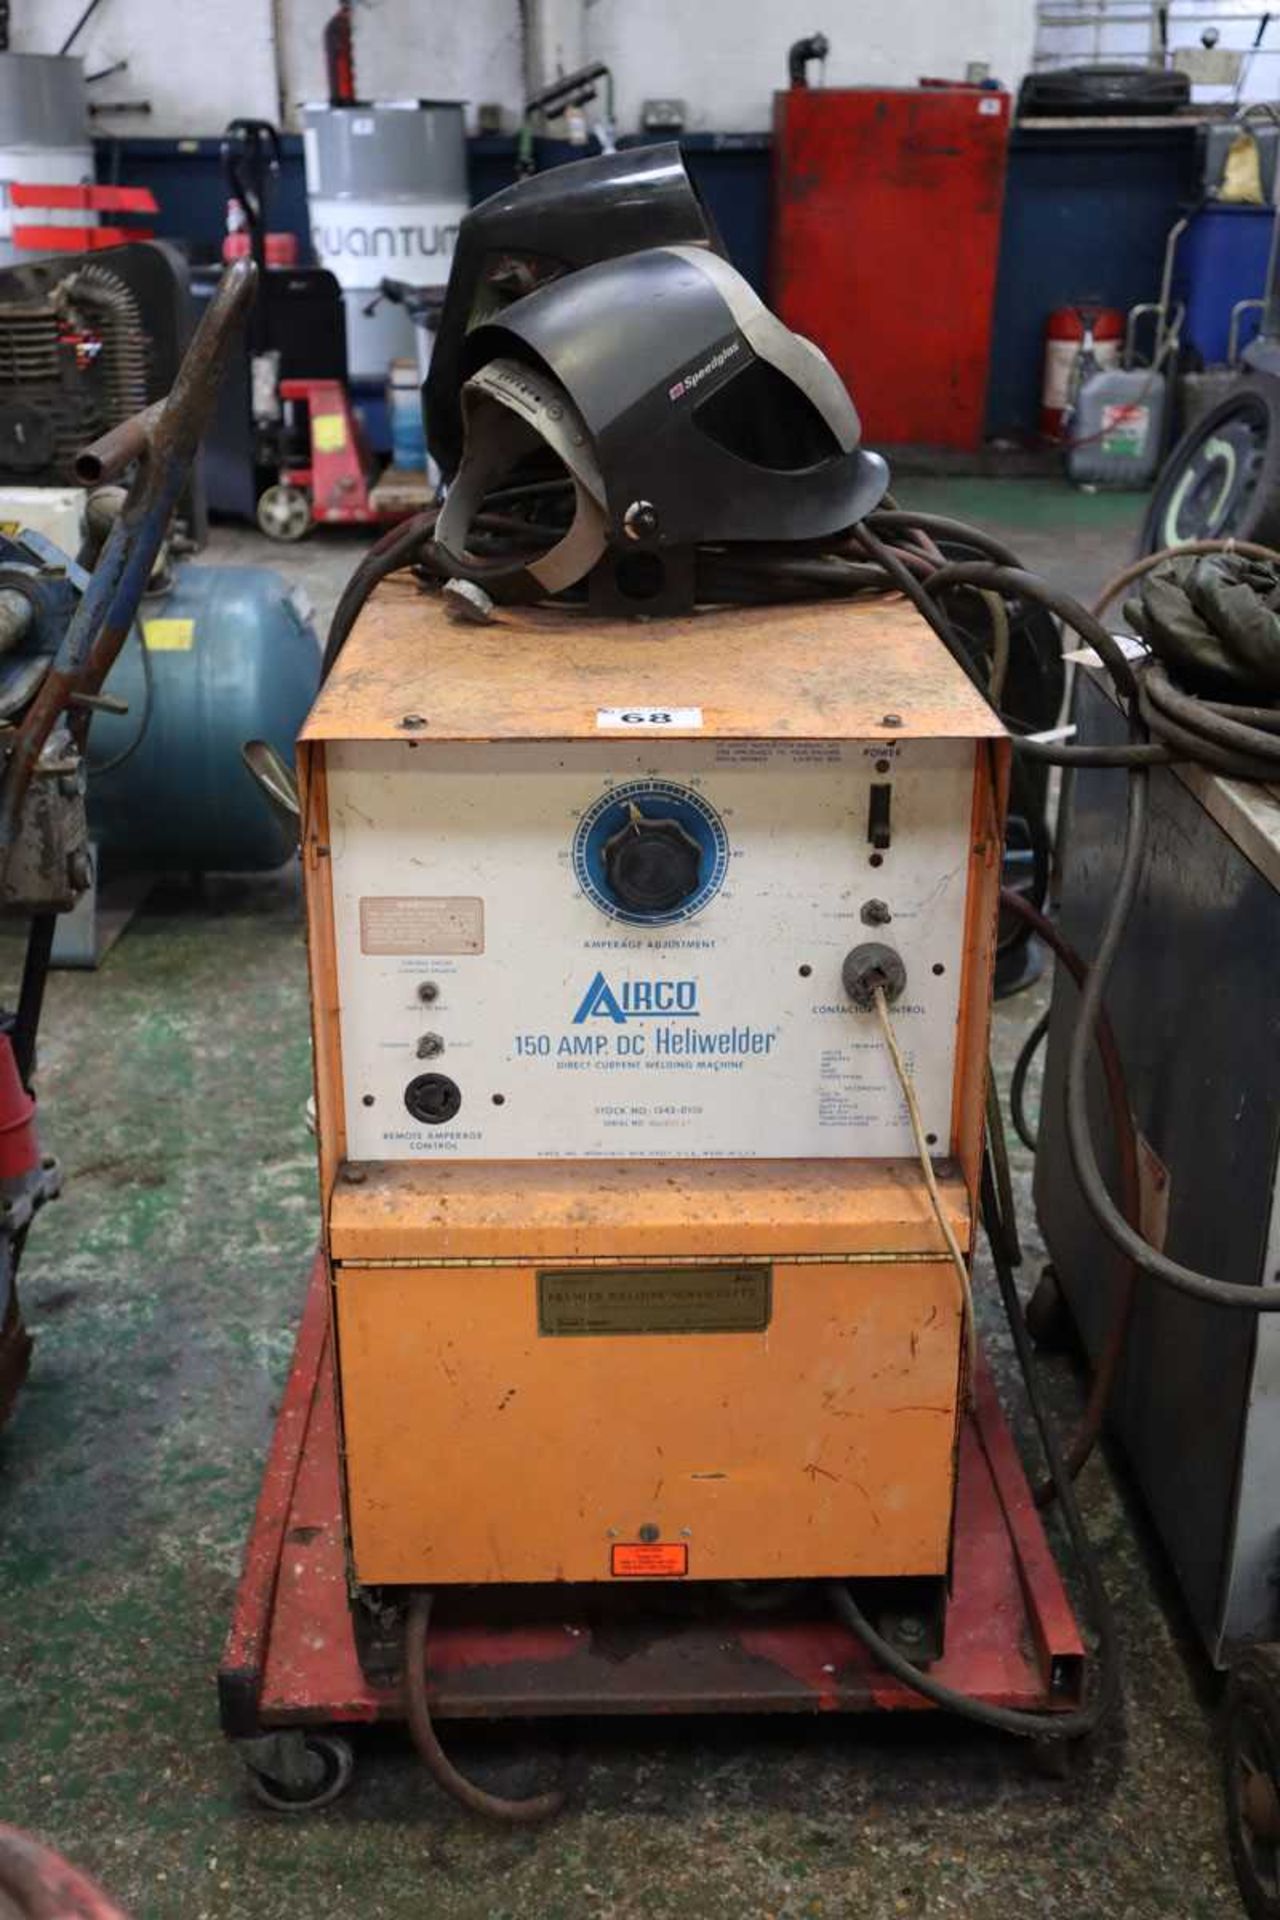 +VAT Airco 150amp DC Heliwelder welding machine on a trolley with various cables and 2 welding